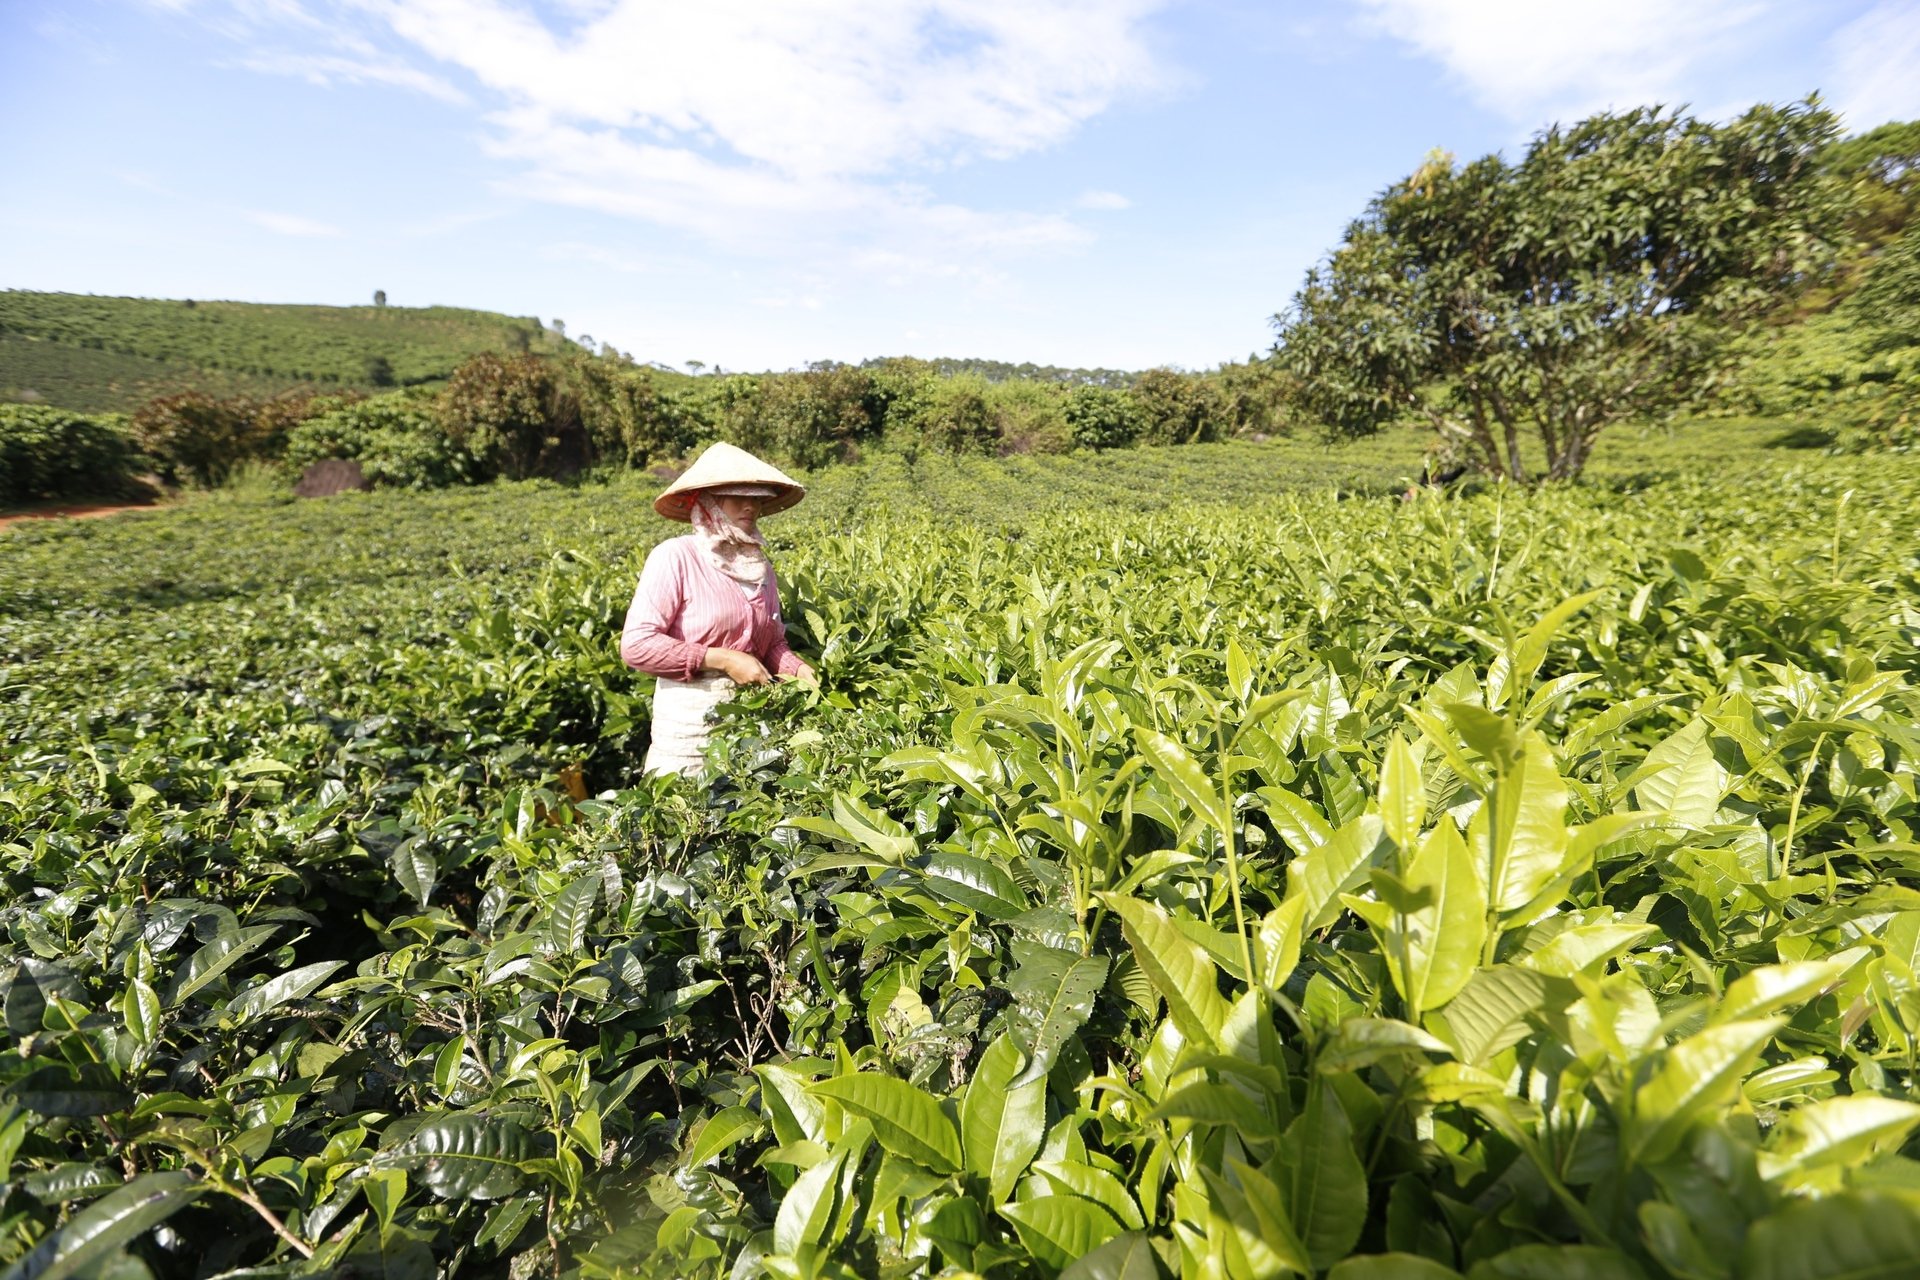 Lam Dong has issued a request for production facilities and businesses to refrain from using chemicals for the purpose of coloring tea leaves, and to improve their entire management of product quality. Photo: C.T.